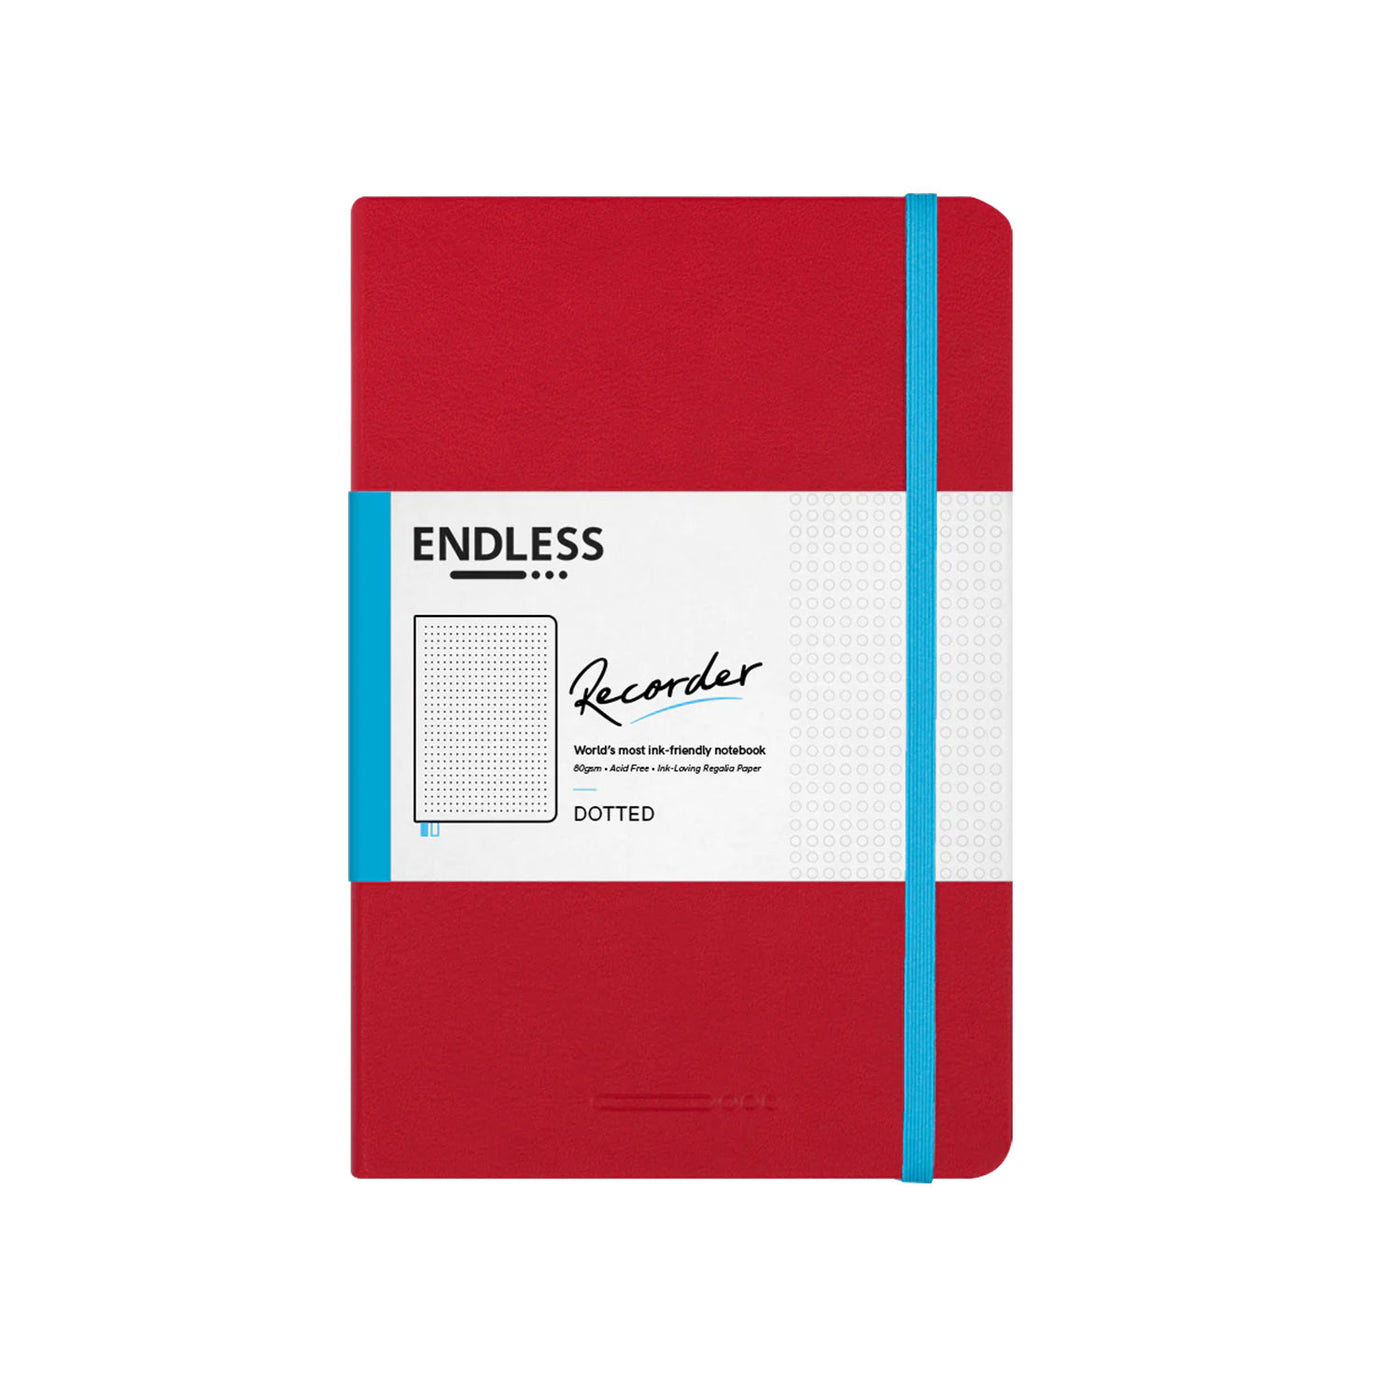 Endless Recorder Crimson Sky Red Regalia Notebook - A5 Dotted 1